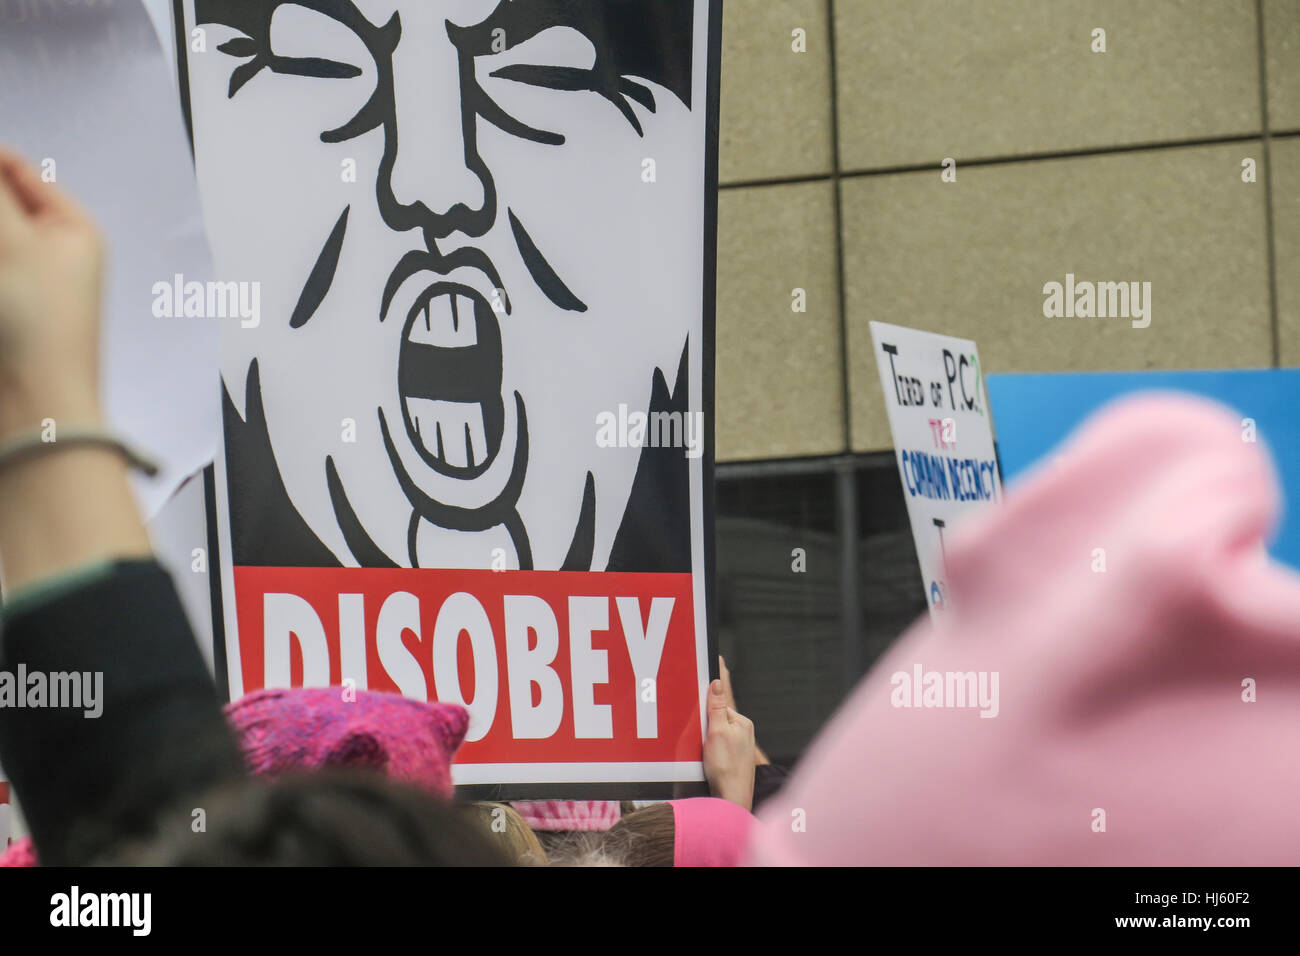 Women's march protesters in Washington, D.C. on January 21, 2017 Stock Photo